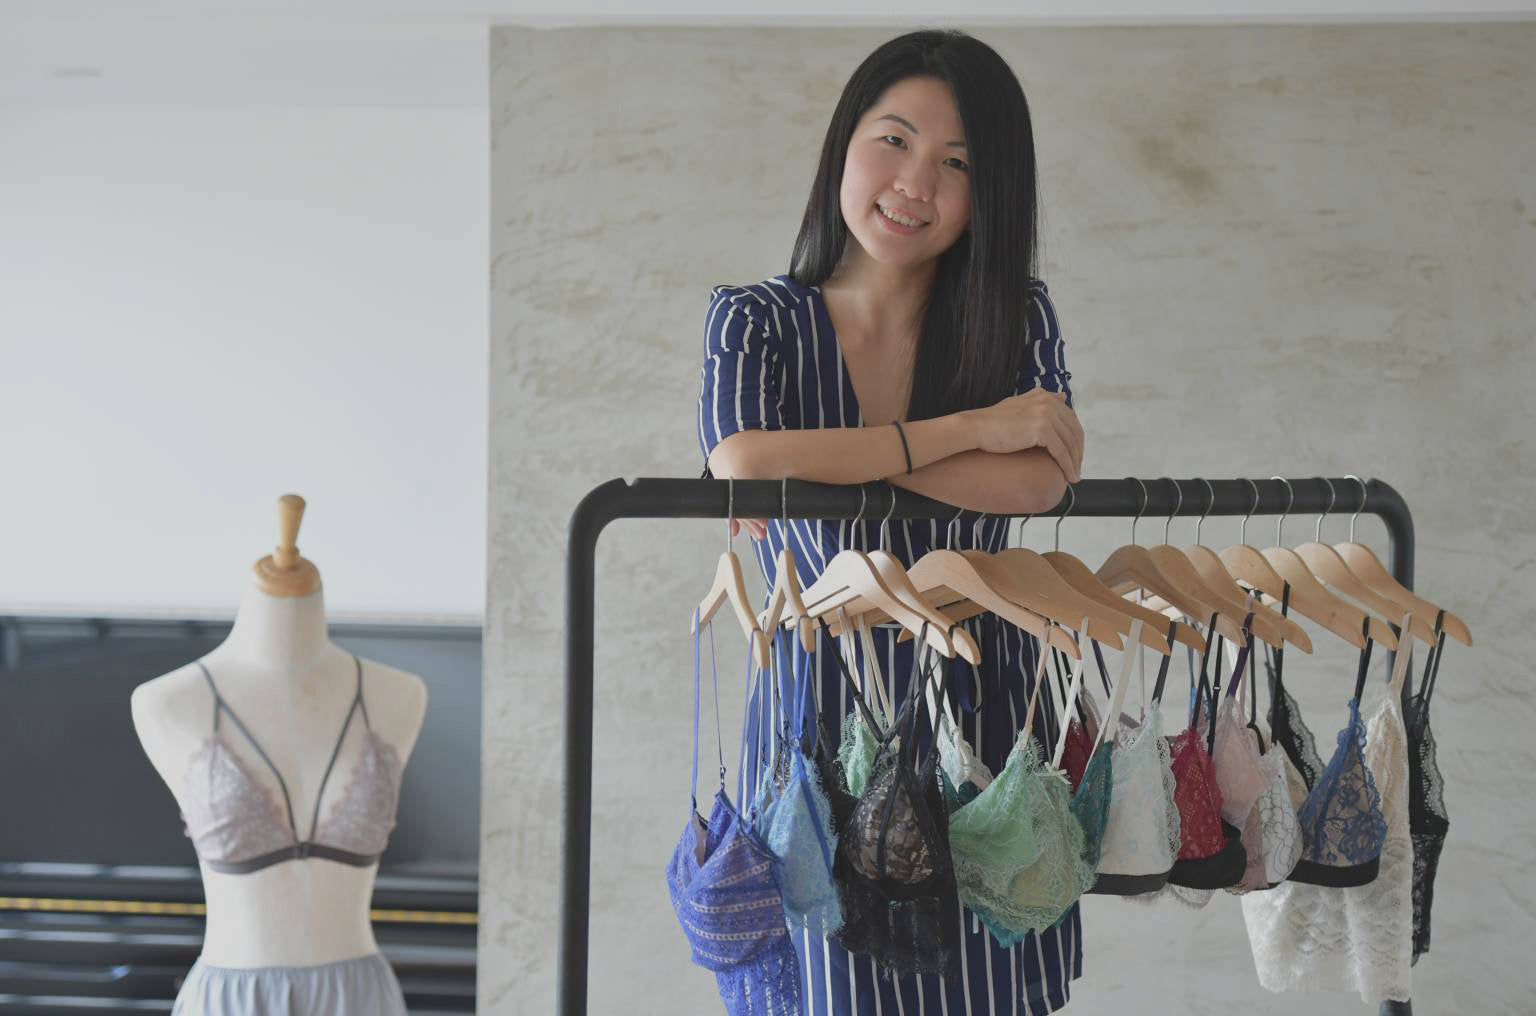 On The Straits Times: Lingerie to flaunt: New trend is giving apparel industry a lift